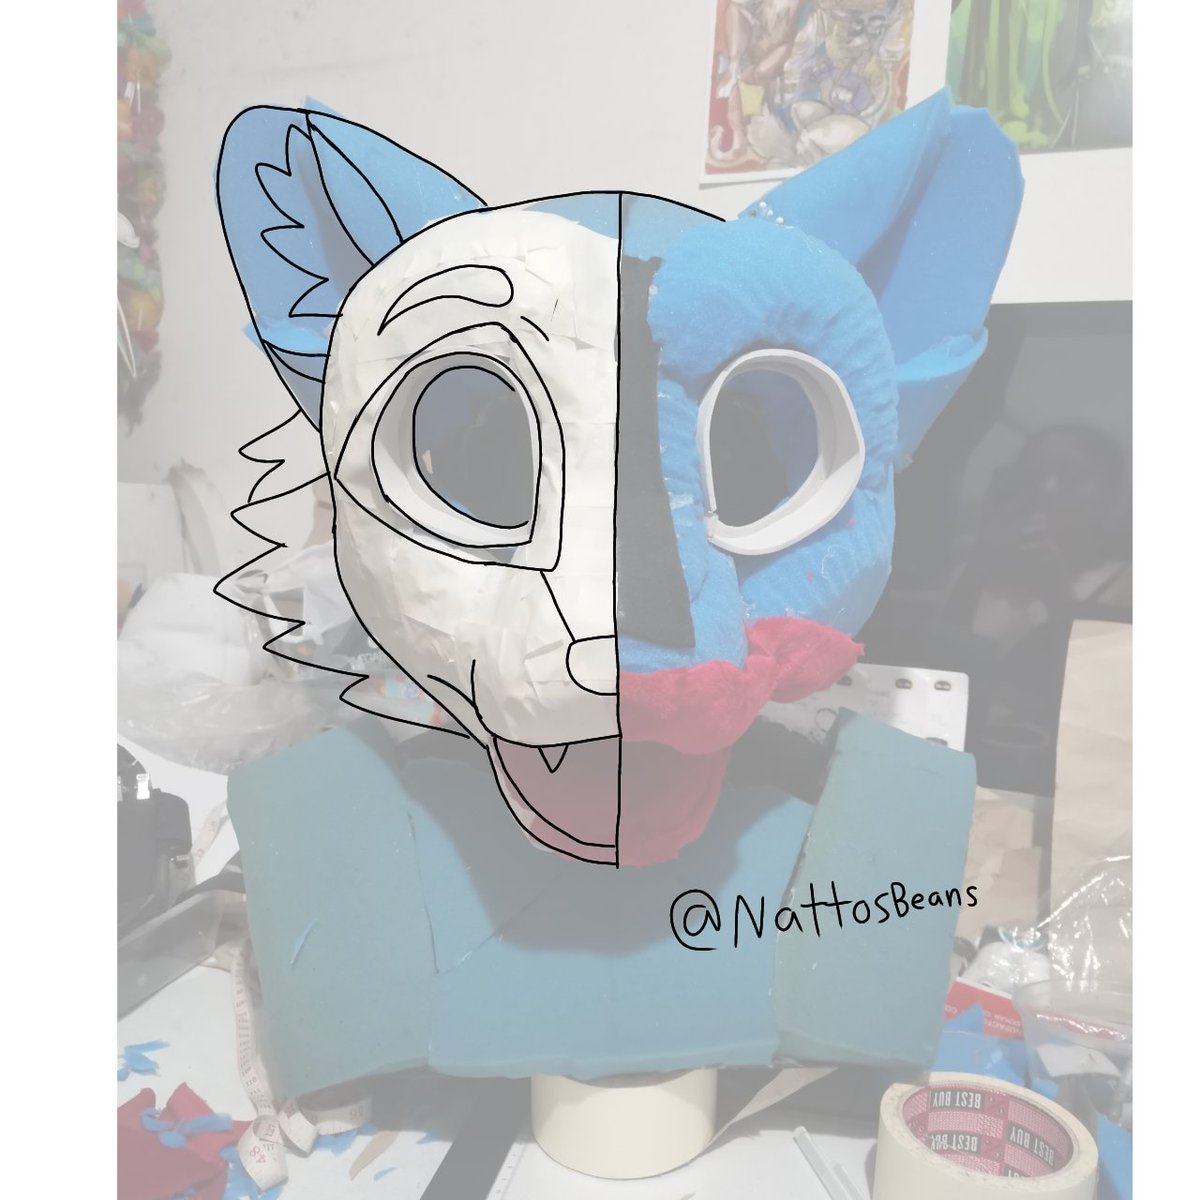 I love the shape of the base is looking good so far!
It was fun sculpting this! 
Really excited to fur this racoon really soon!
Had to lineart it digitally so I'll know where to place the markings and such^^
This is a commision^^
#furrycommunity #fursuitmaker #fursuit